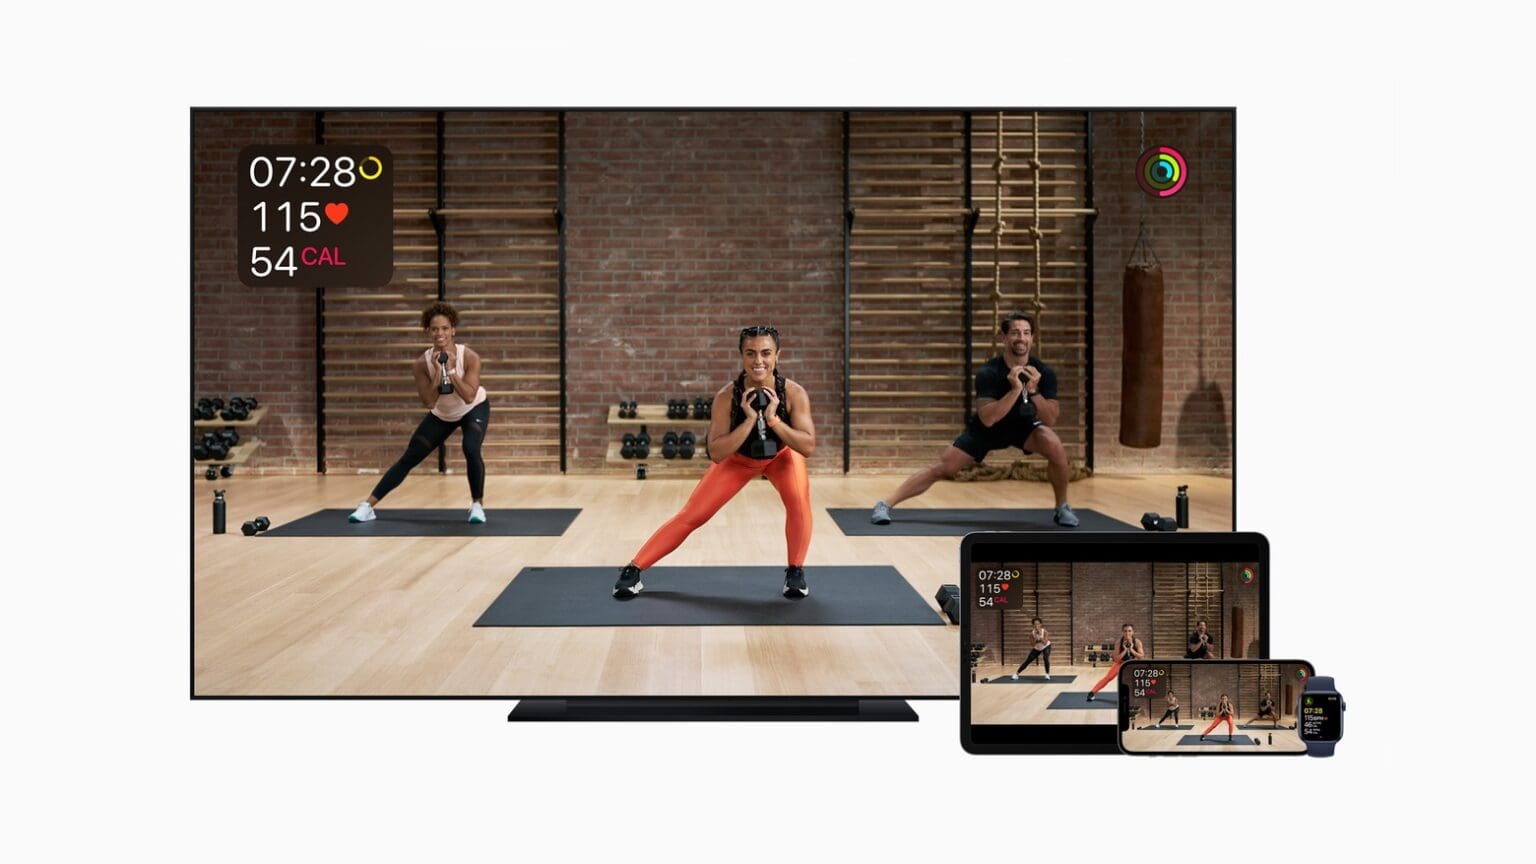 Apple Fitness+ will whip you into shape starting December 14.